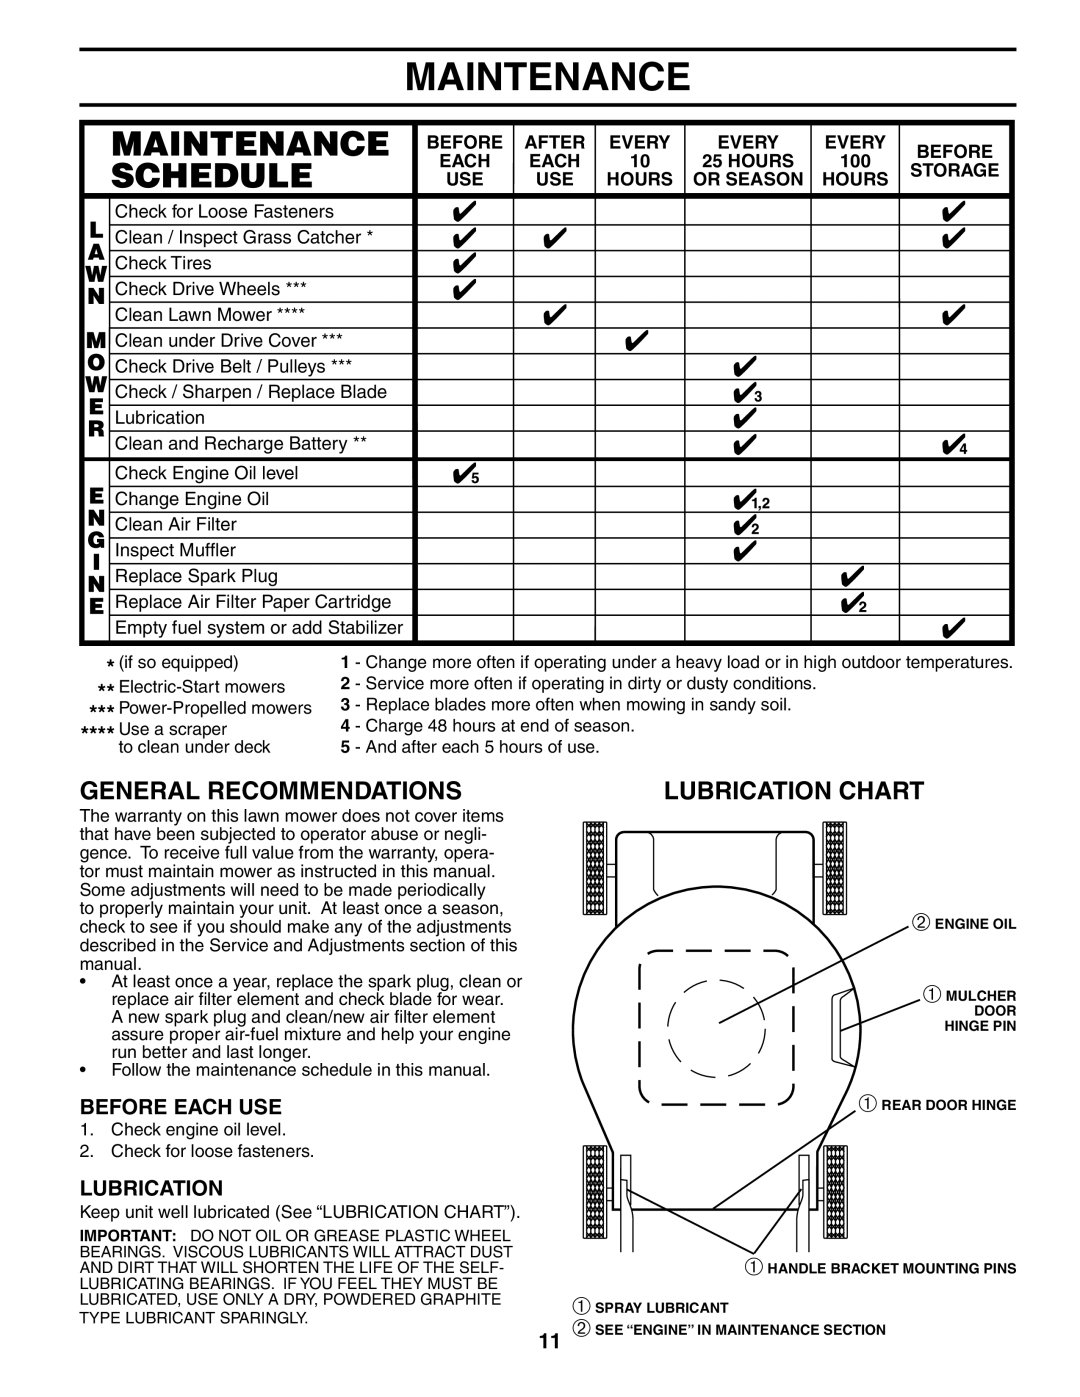 Husqvarna 55R21HVL Maintenance, General Recommendations, Lubrication Chart, Before Each Use, After, Every, Hours, Storage 